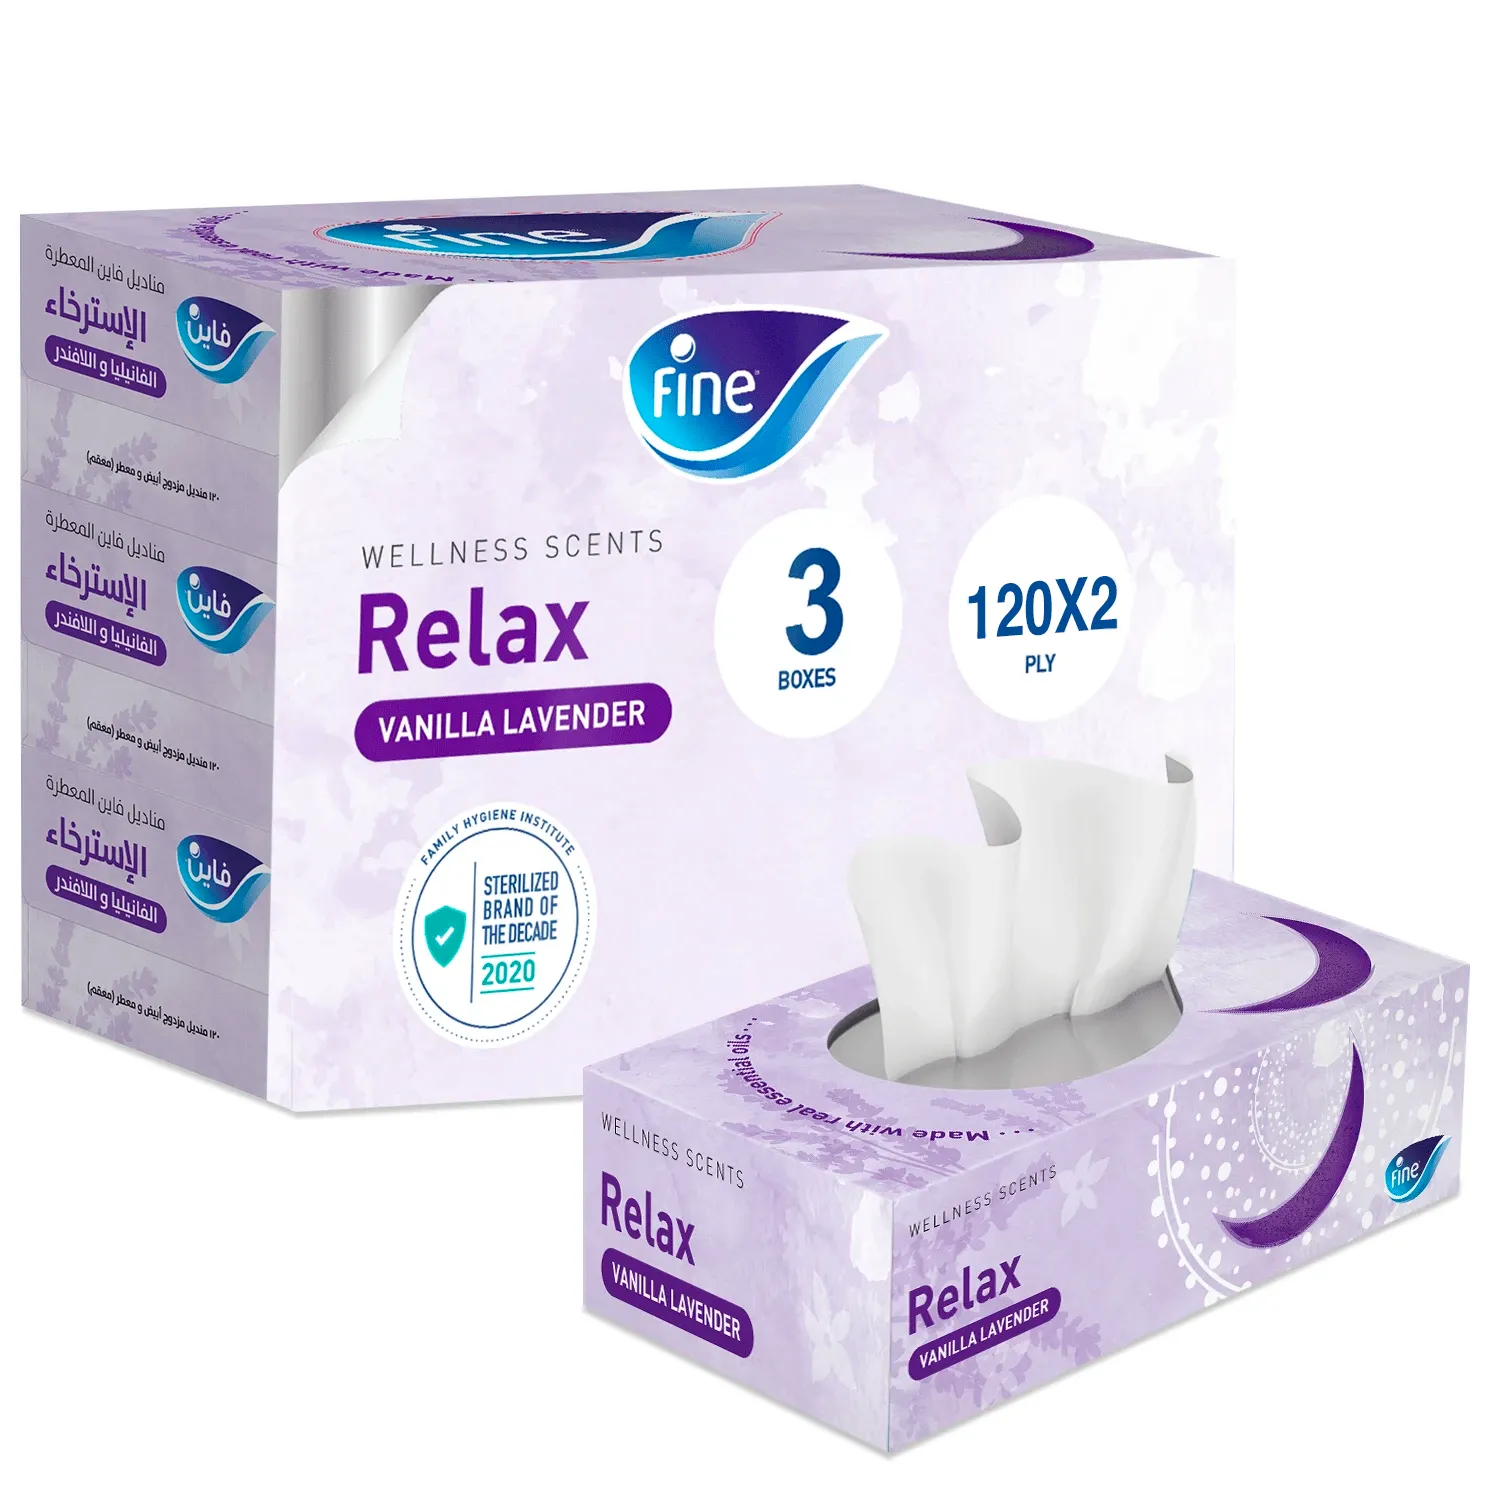 Fine, Facial Tissues, Wellness Scents Relax, Vanilla Lavender, 120X2 Ply White Tissues, Pack of 3